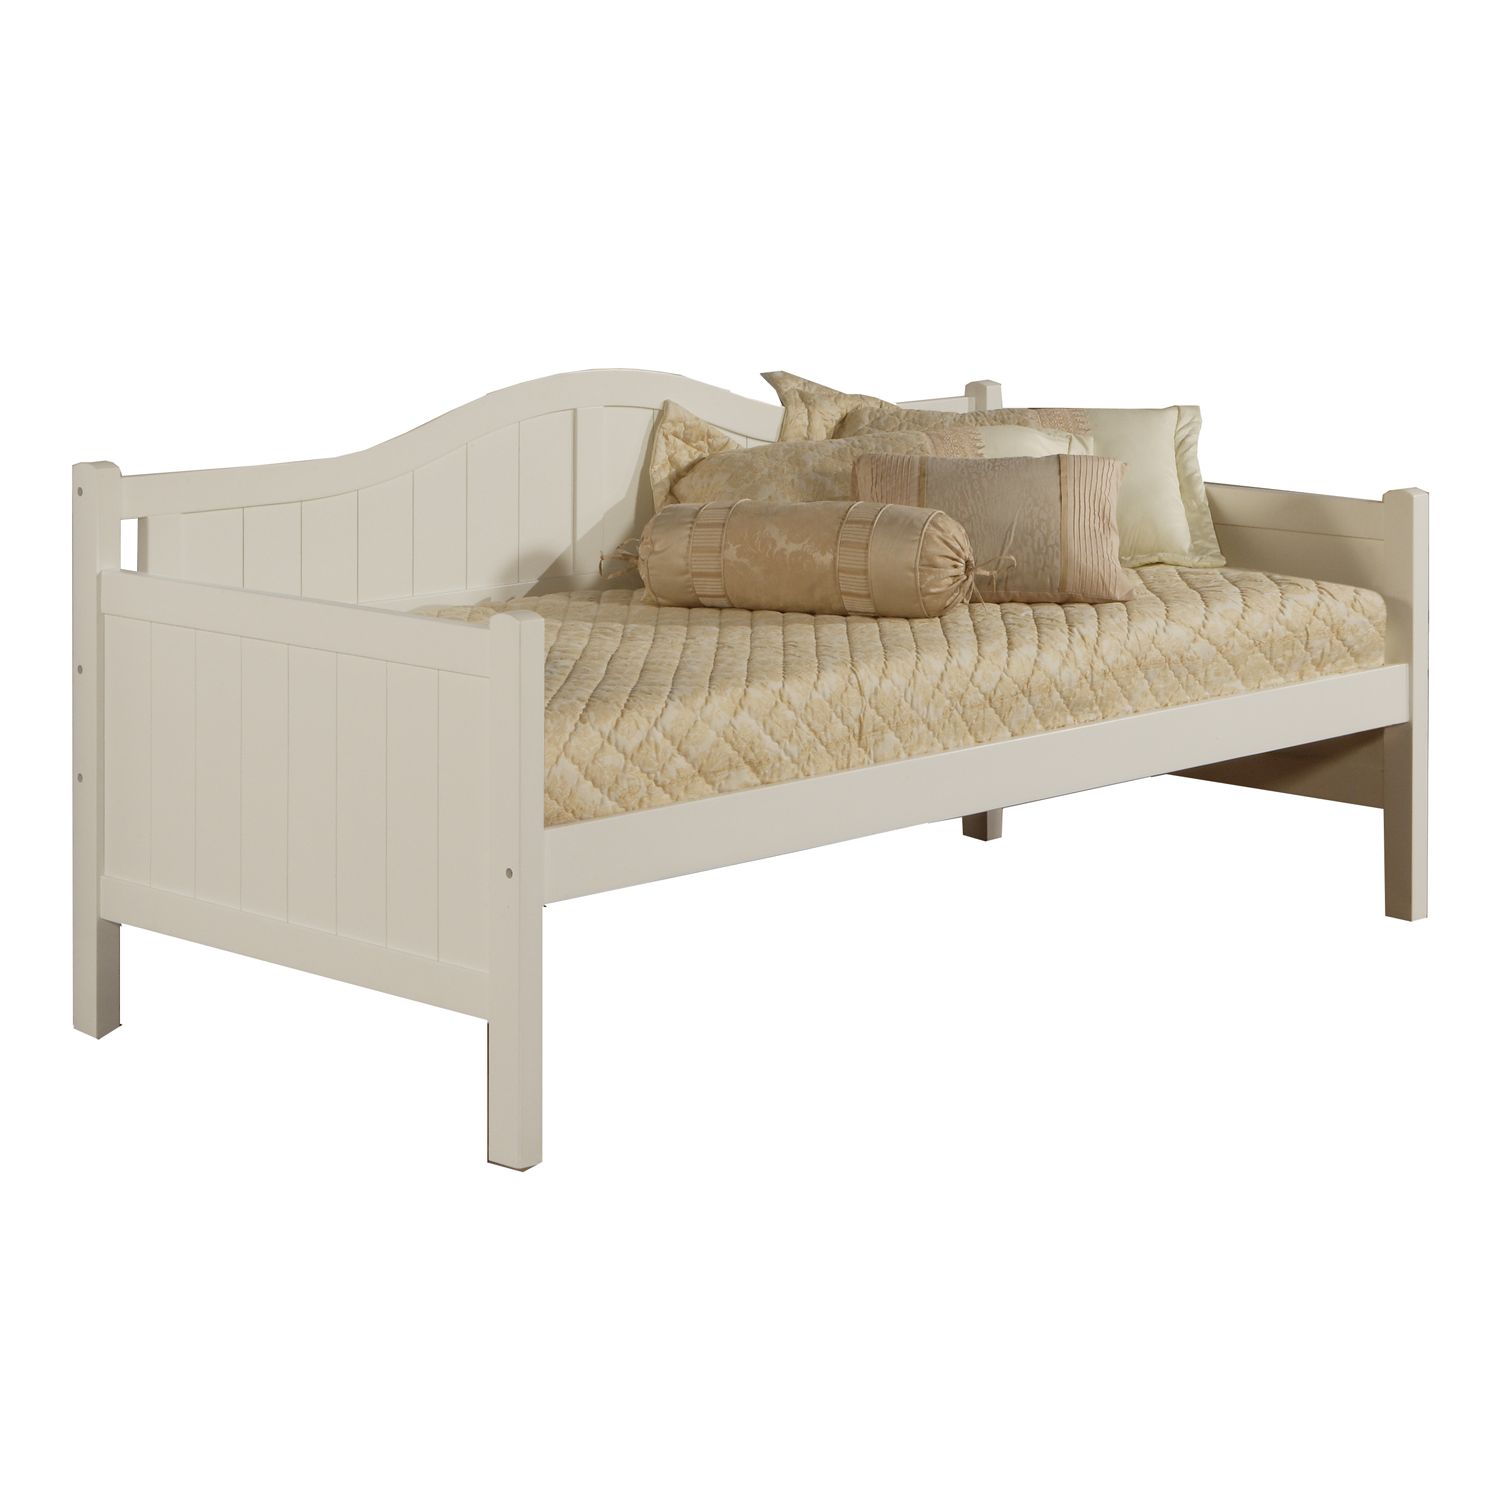 Image for Hillsdale Furniture Staci Daybed at Kohl's.